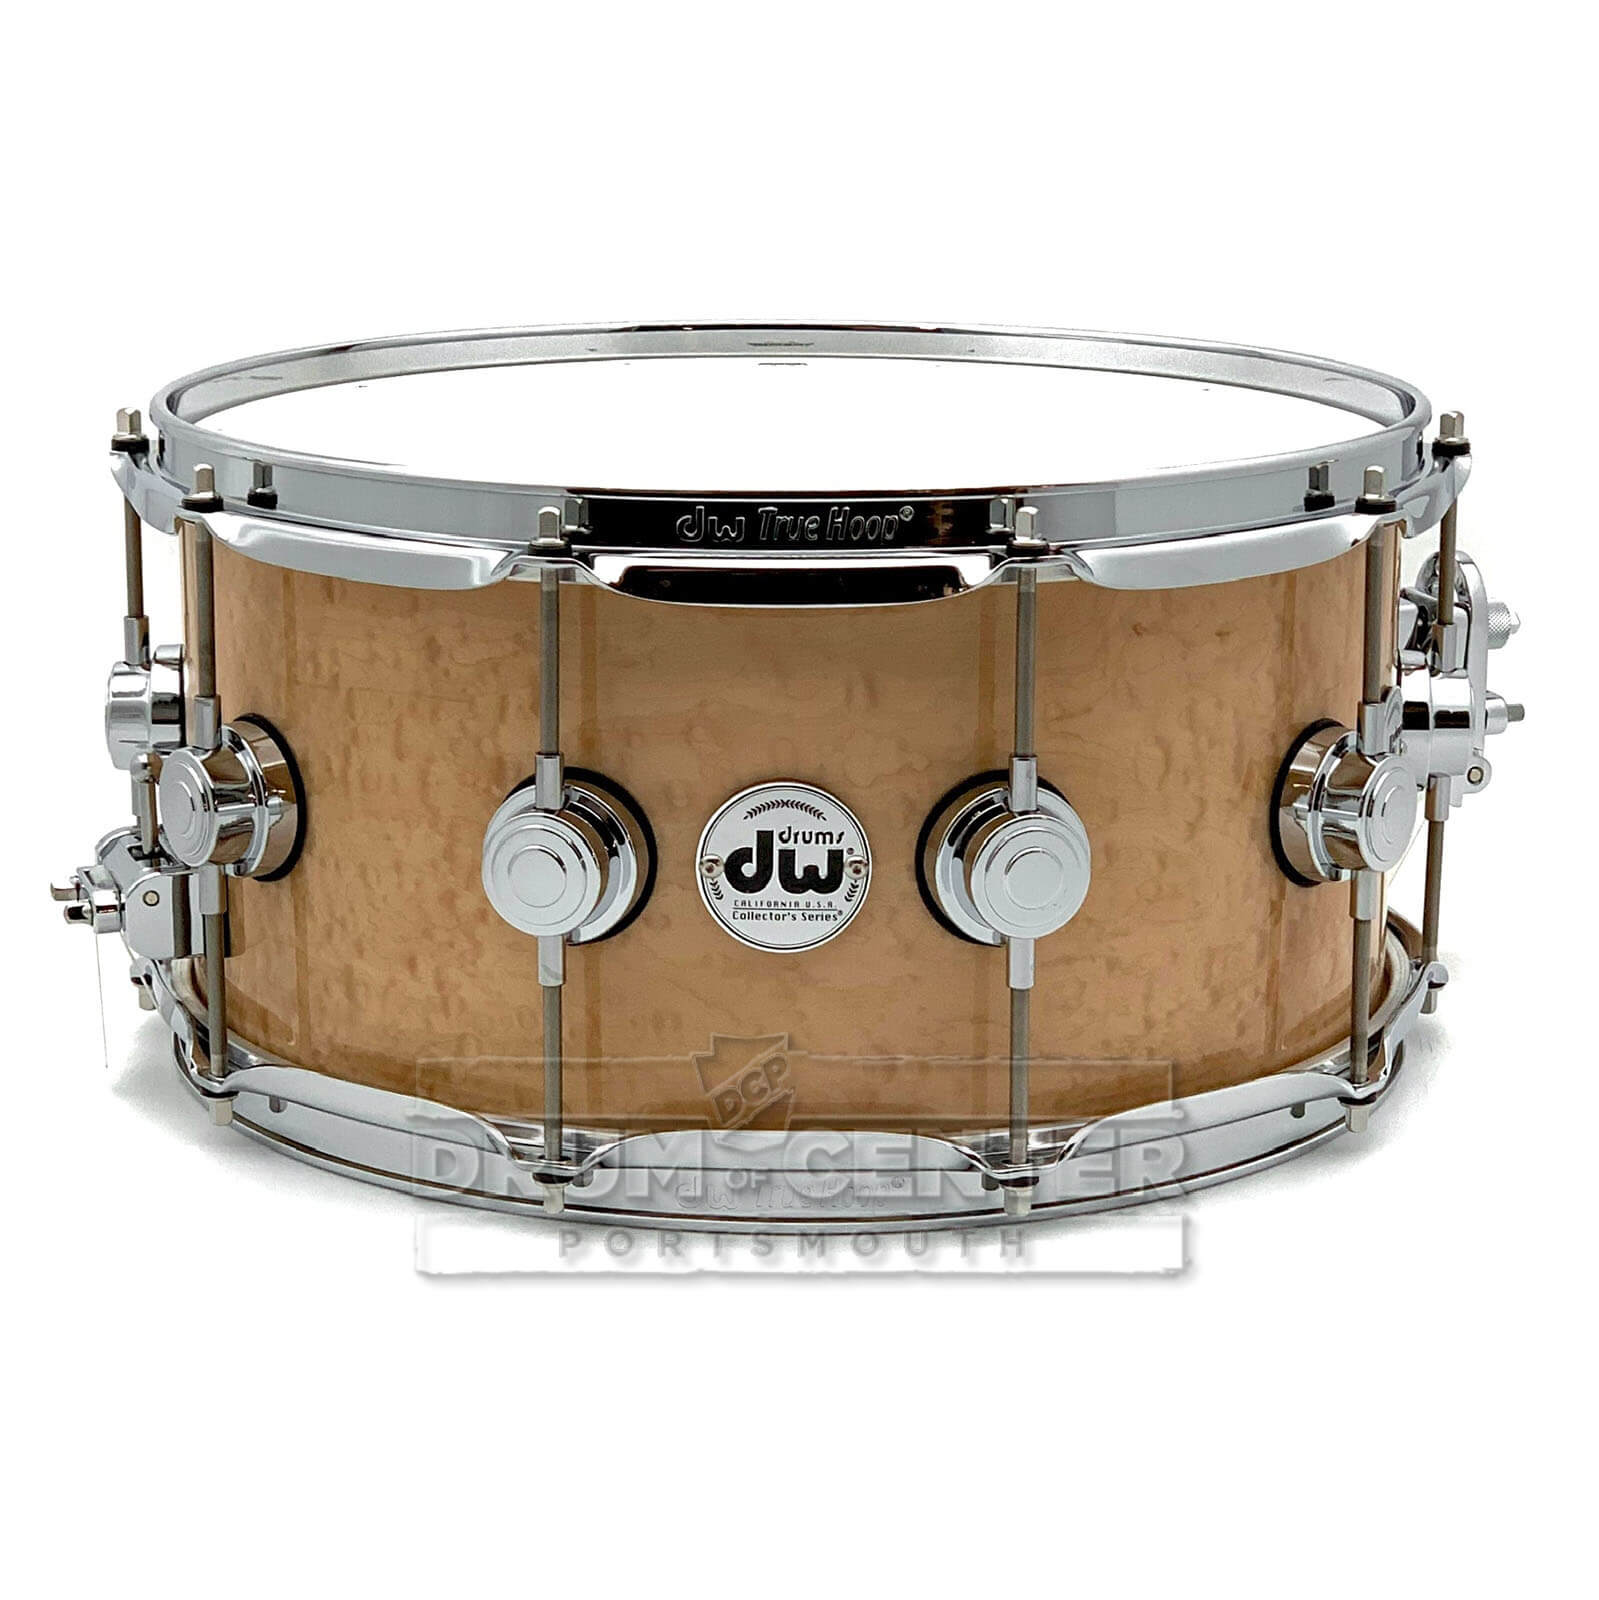 DW Collectors SSC Maple Snare Drum 14x6.5 Exotic Teardrop Maple